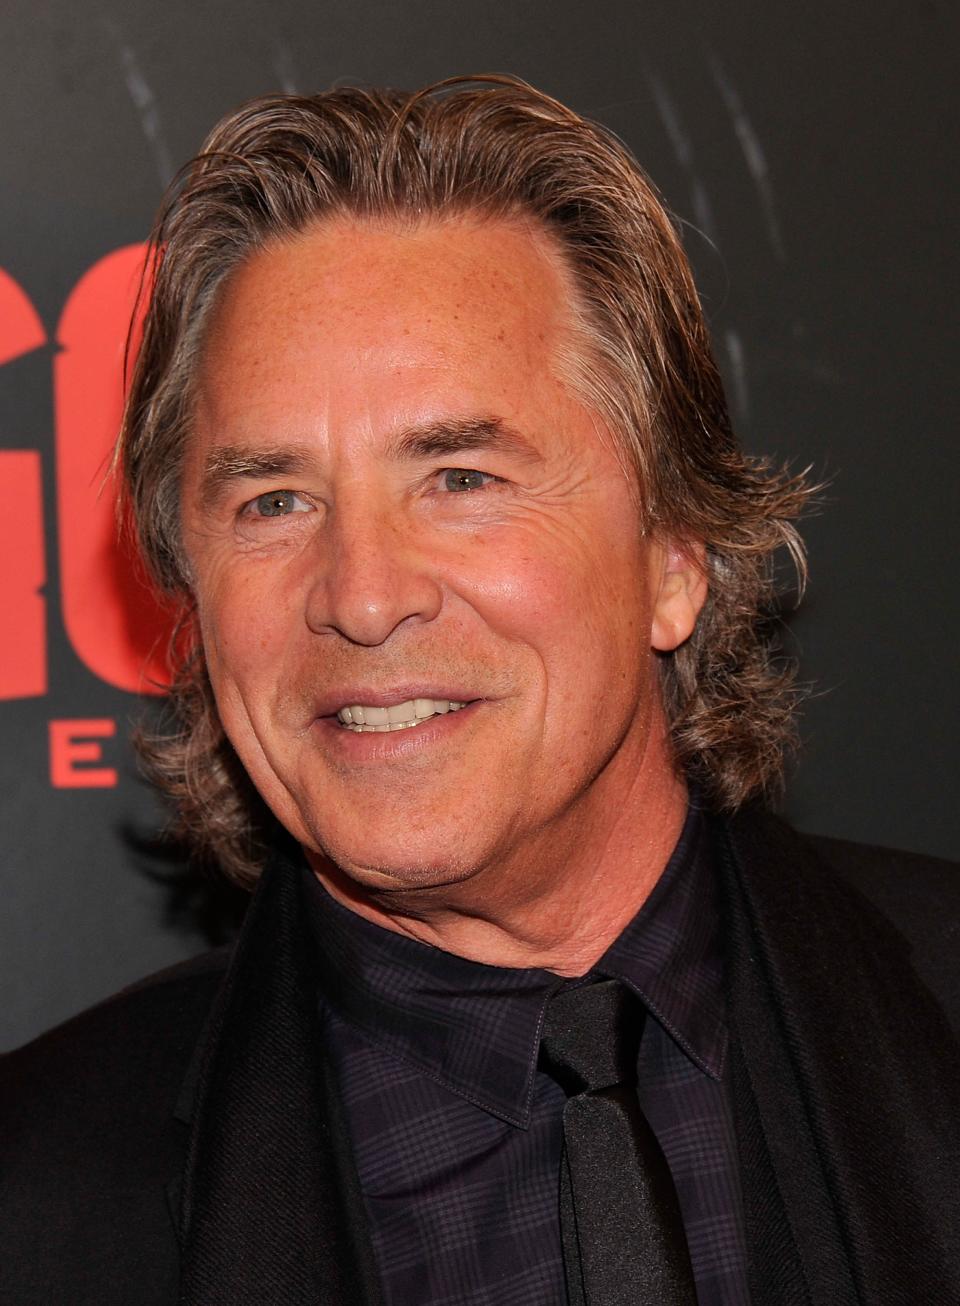 NEW YORK, NY - DECEMBER 11: Don Johnson attends a screening of "Django Unchained" hosted by The Weinstein Company with The Hollywood Reporter, Samsung Galaxy and The Cinema Society at Ziegfeld Theater on December 11, 2012 in New York City. (Photo by Stephen Lovekin/Getty Images)